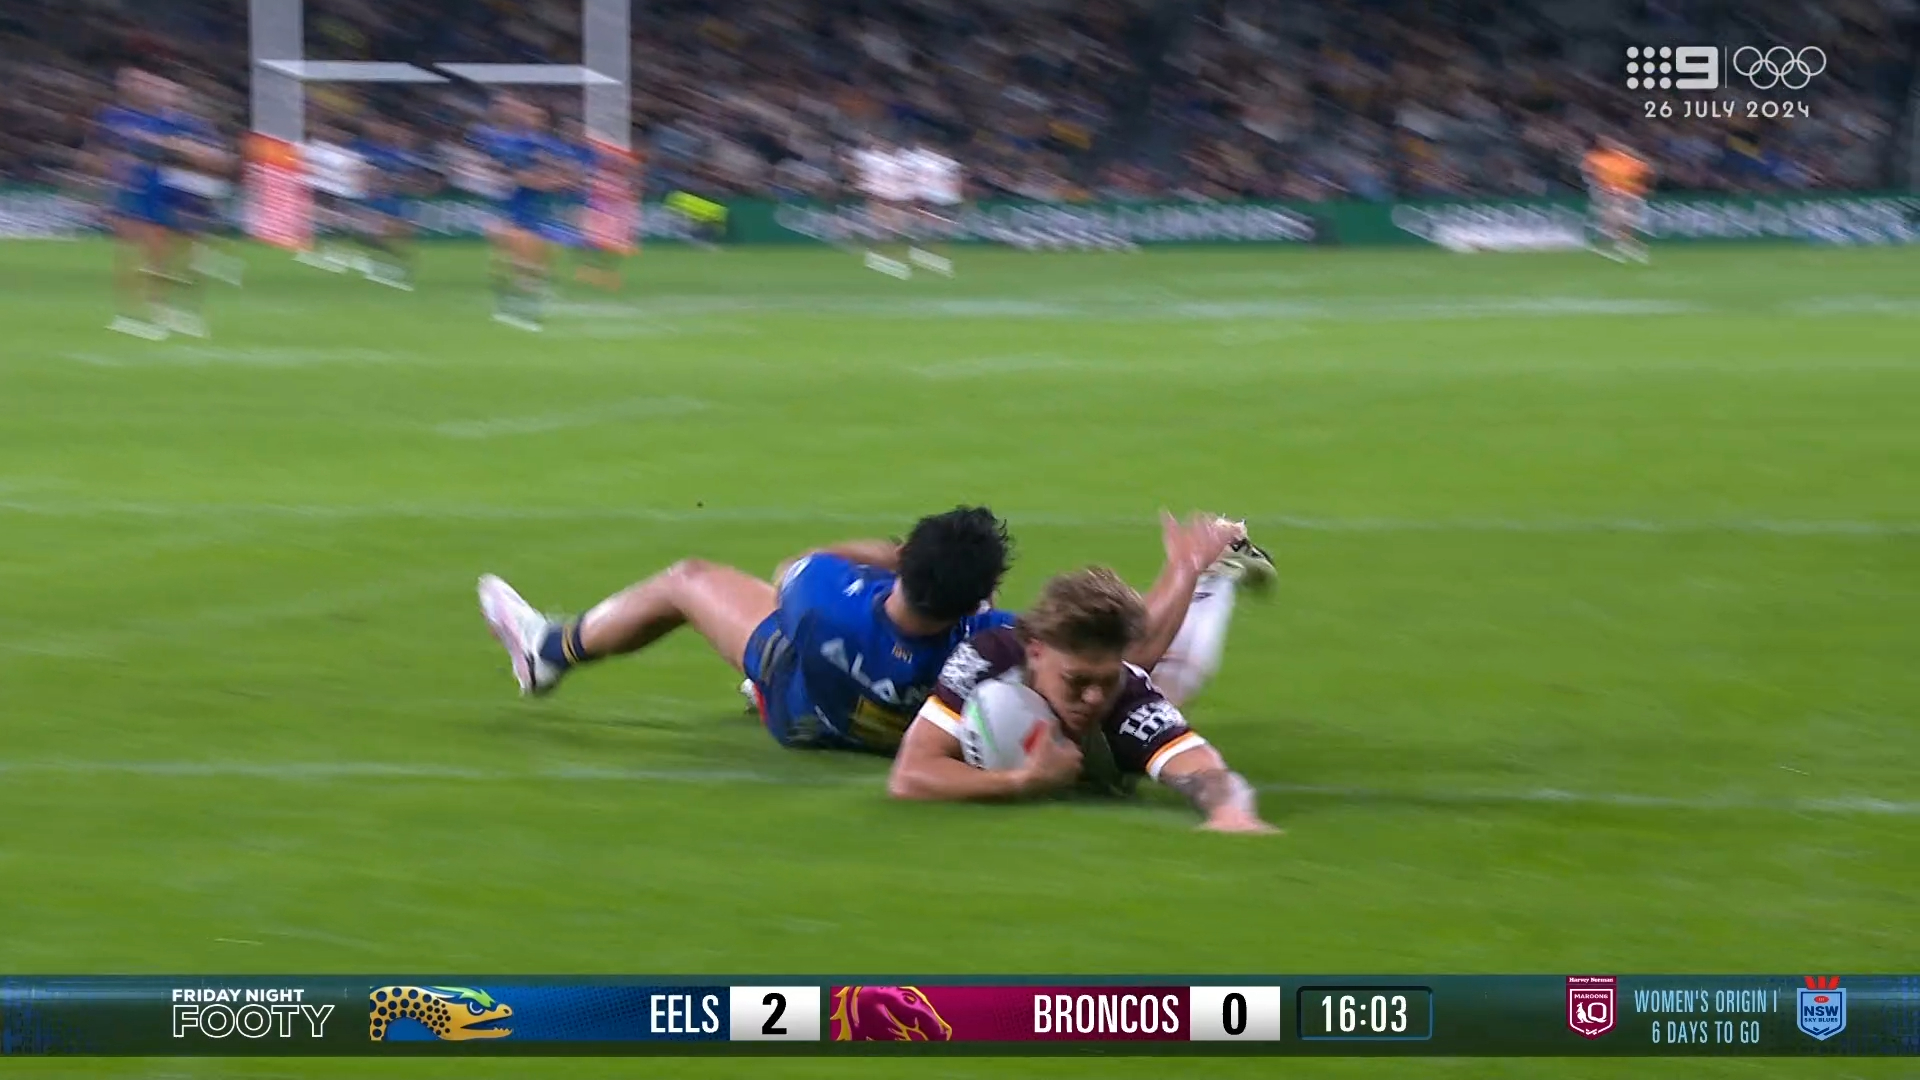 Crunching tackle leads to Broncos try